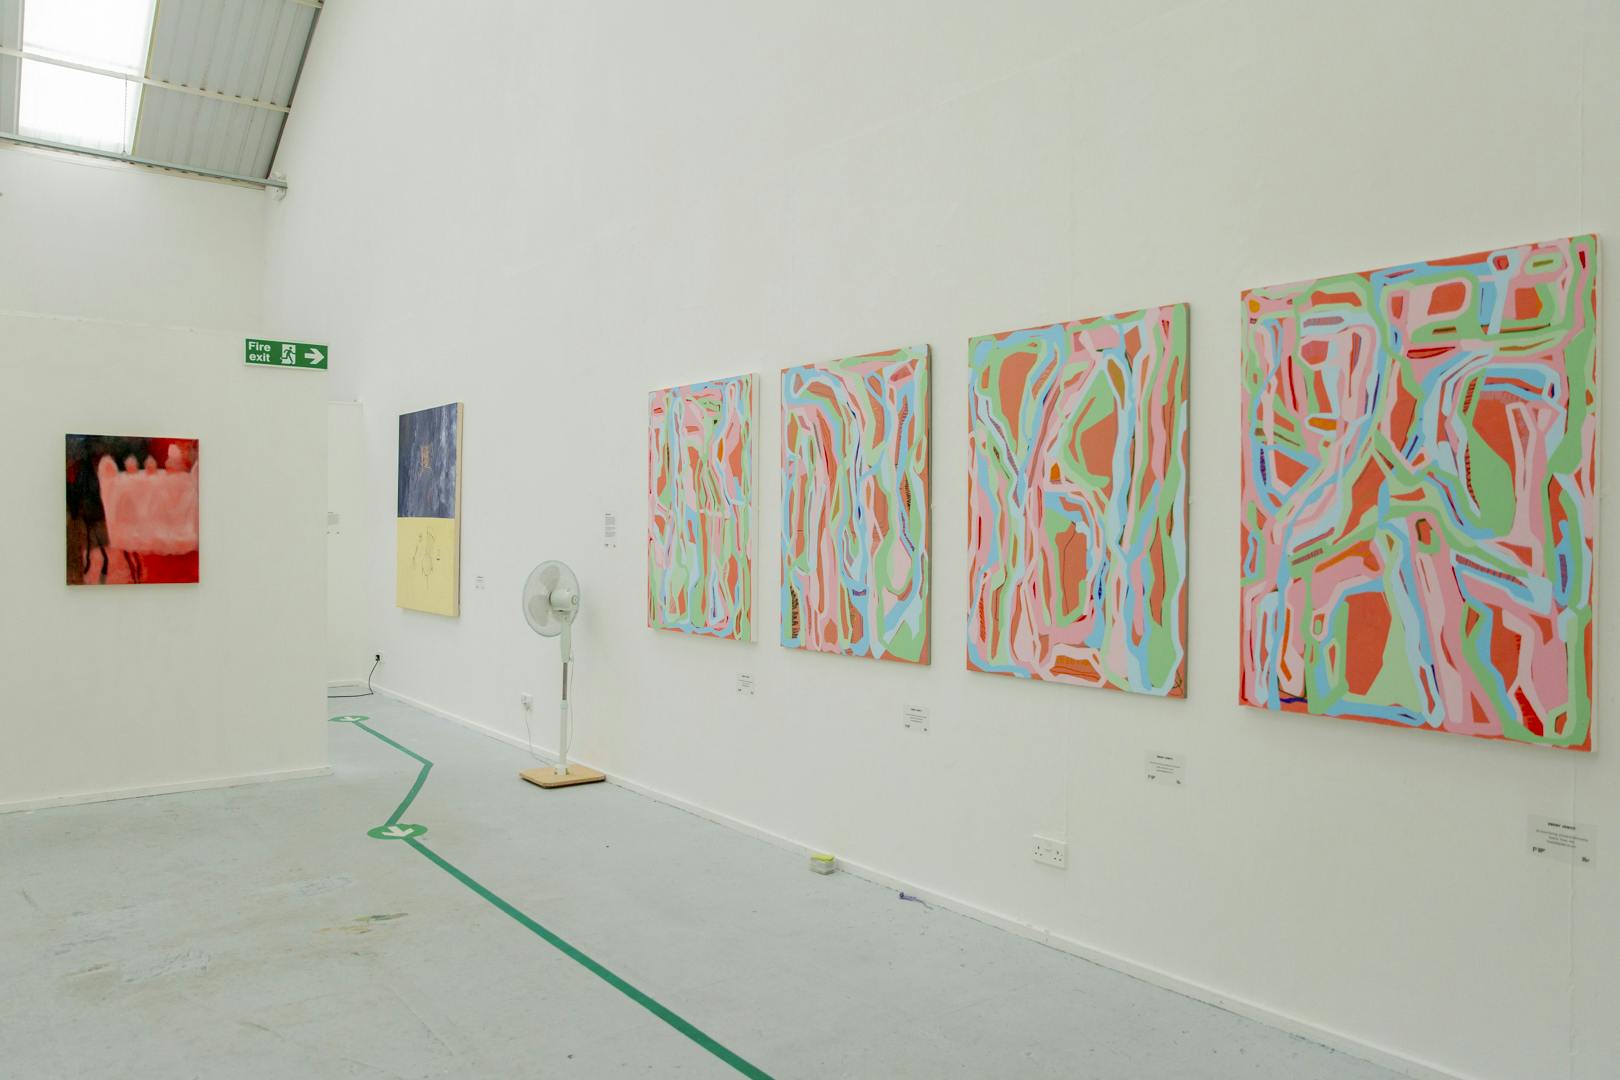 Image shows Ebony's four paintings in situ in the exhibition, featuring bright colourful patterns against a white neutral background with other student work in the background